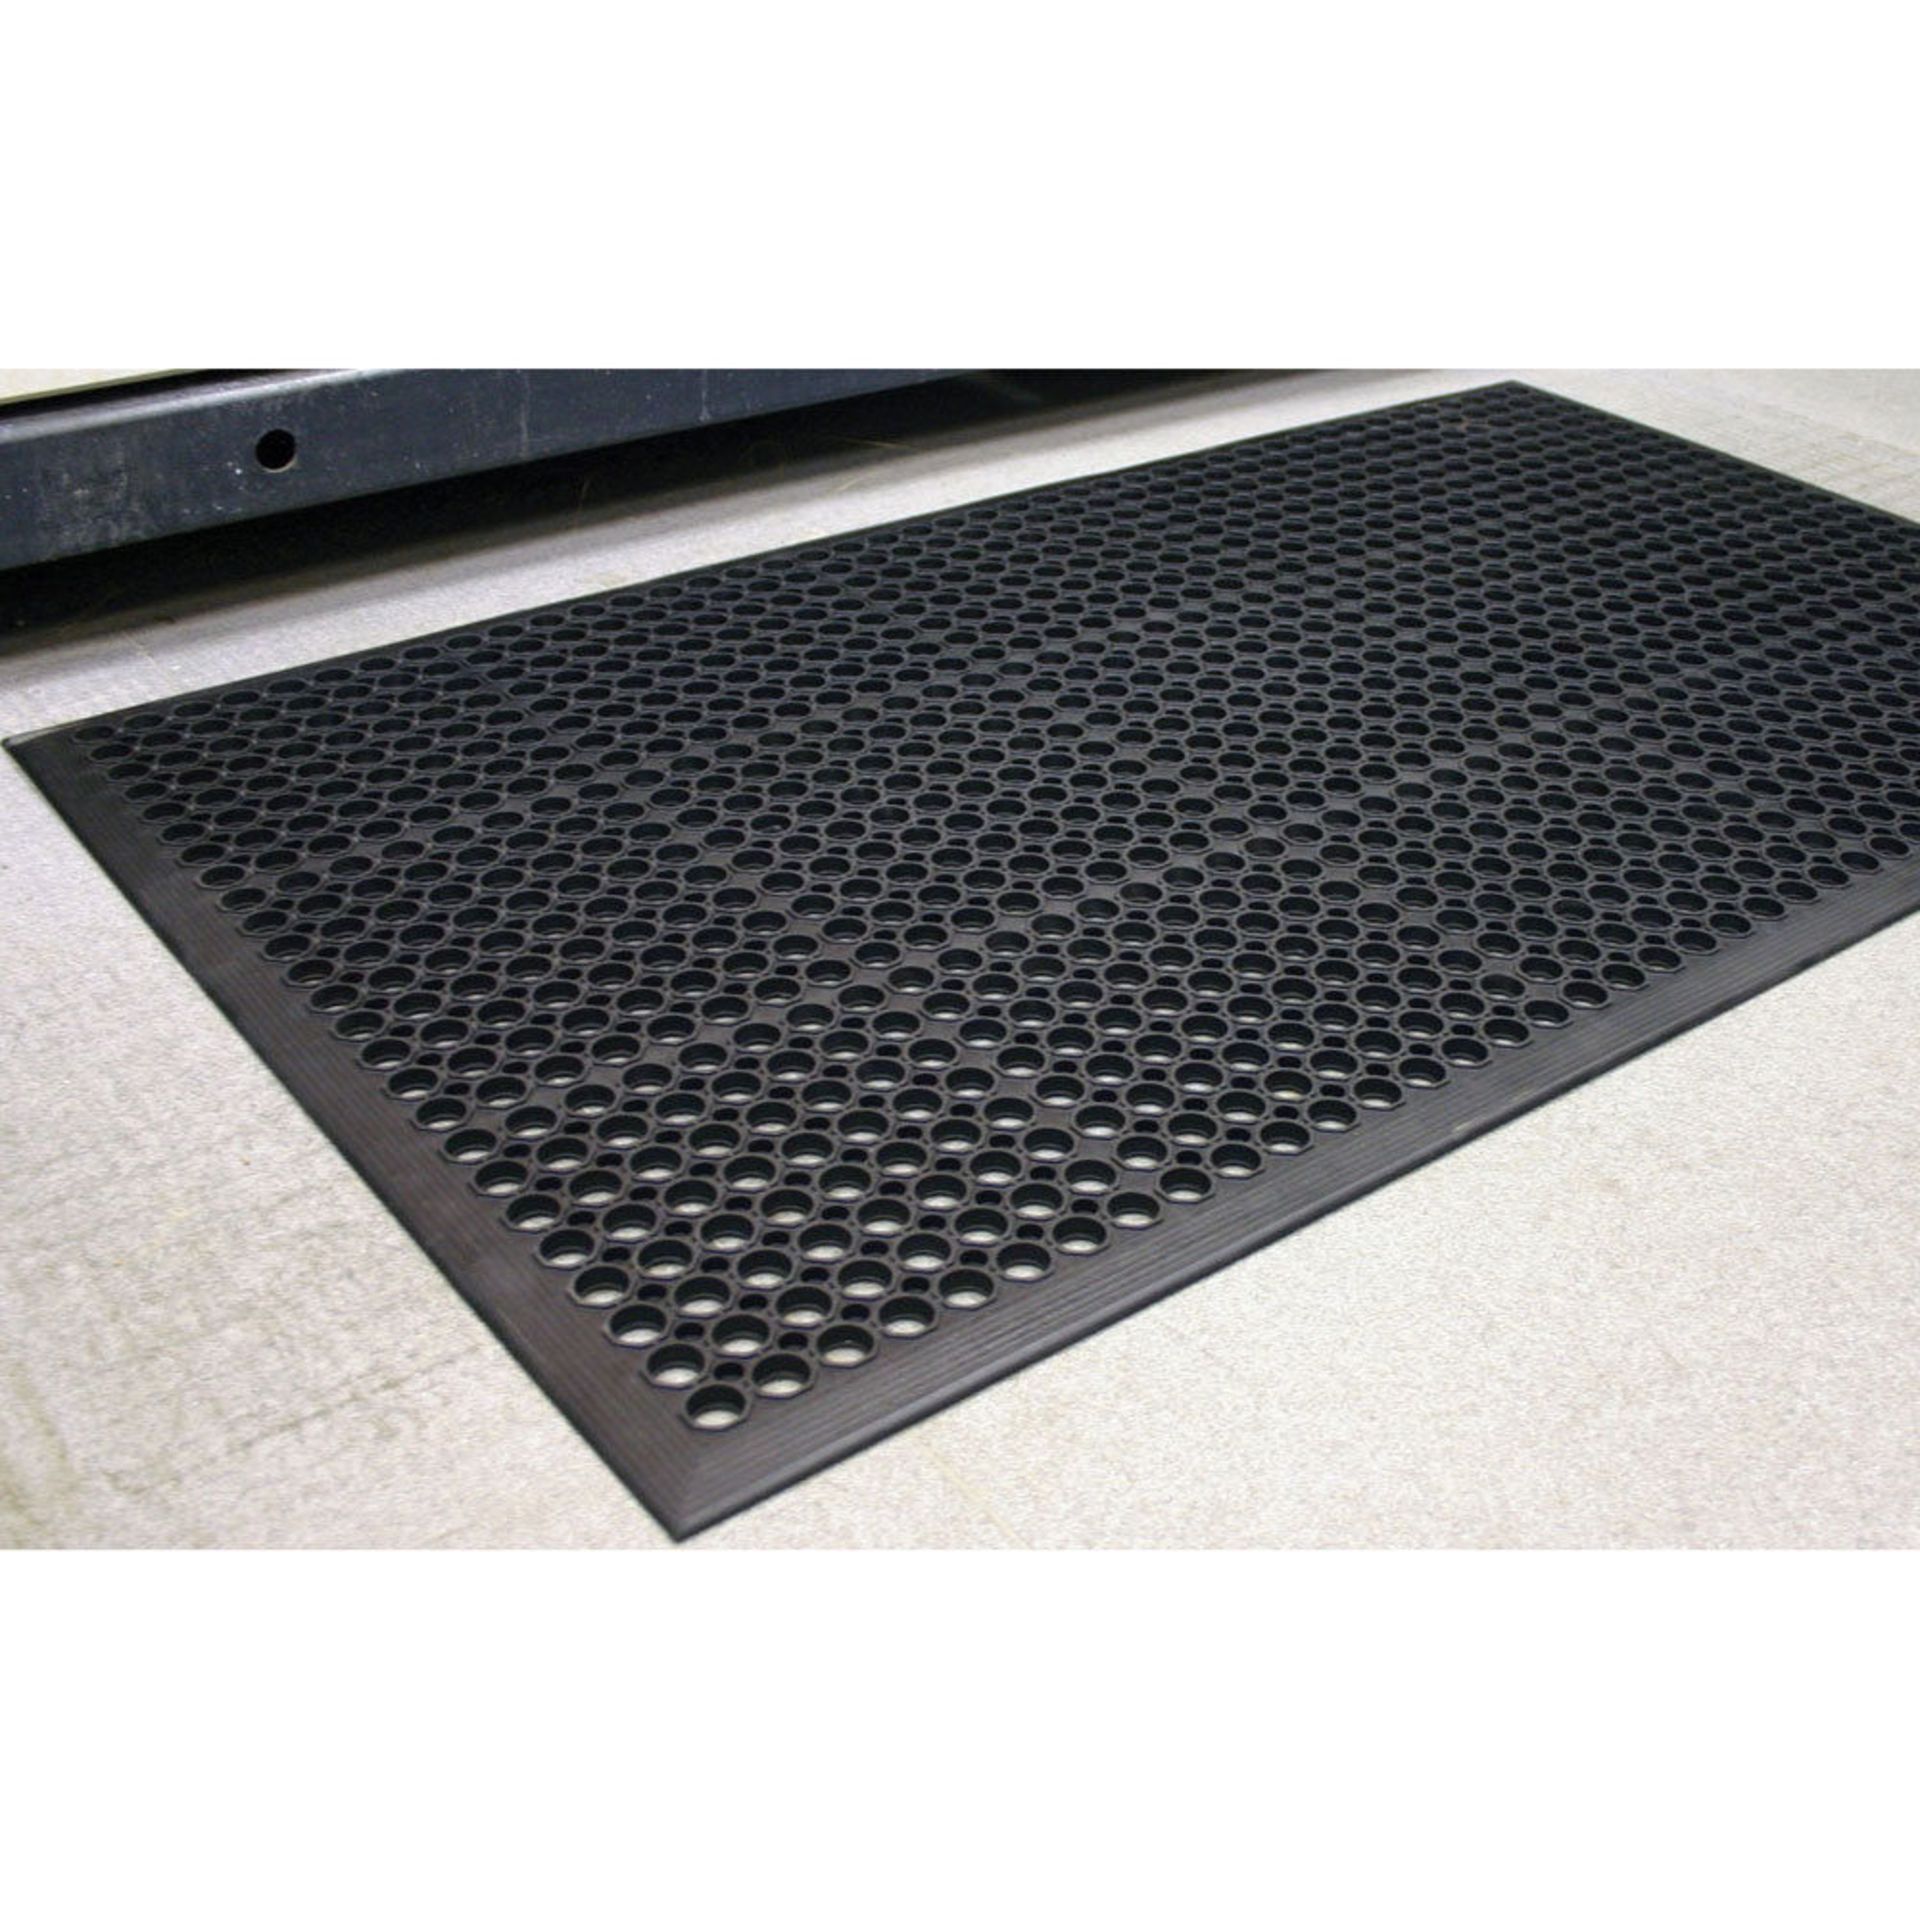 V Brand New Anti-Fatigue Mat Dimensions: 0.9 X 1.5 M - Thickness: 10 mm NOTE: Item Is Available